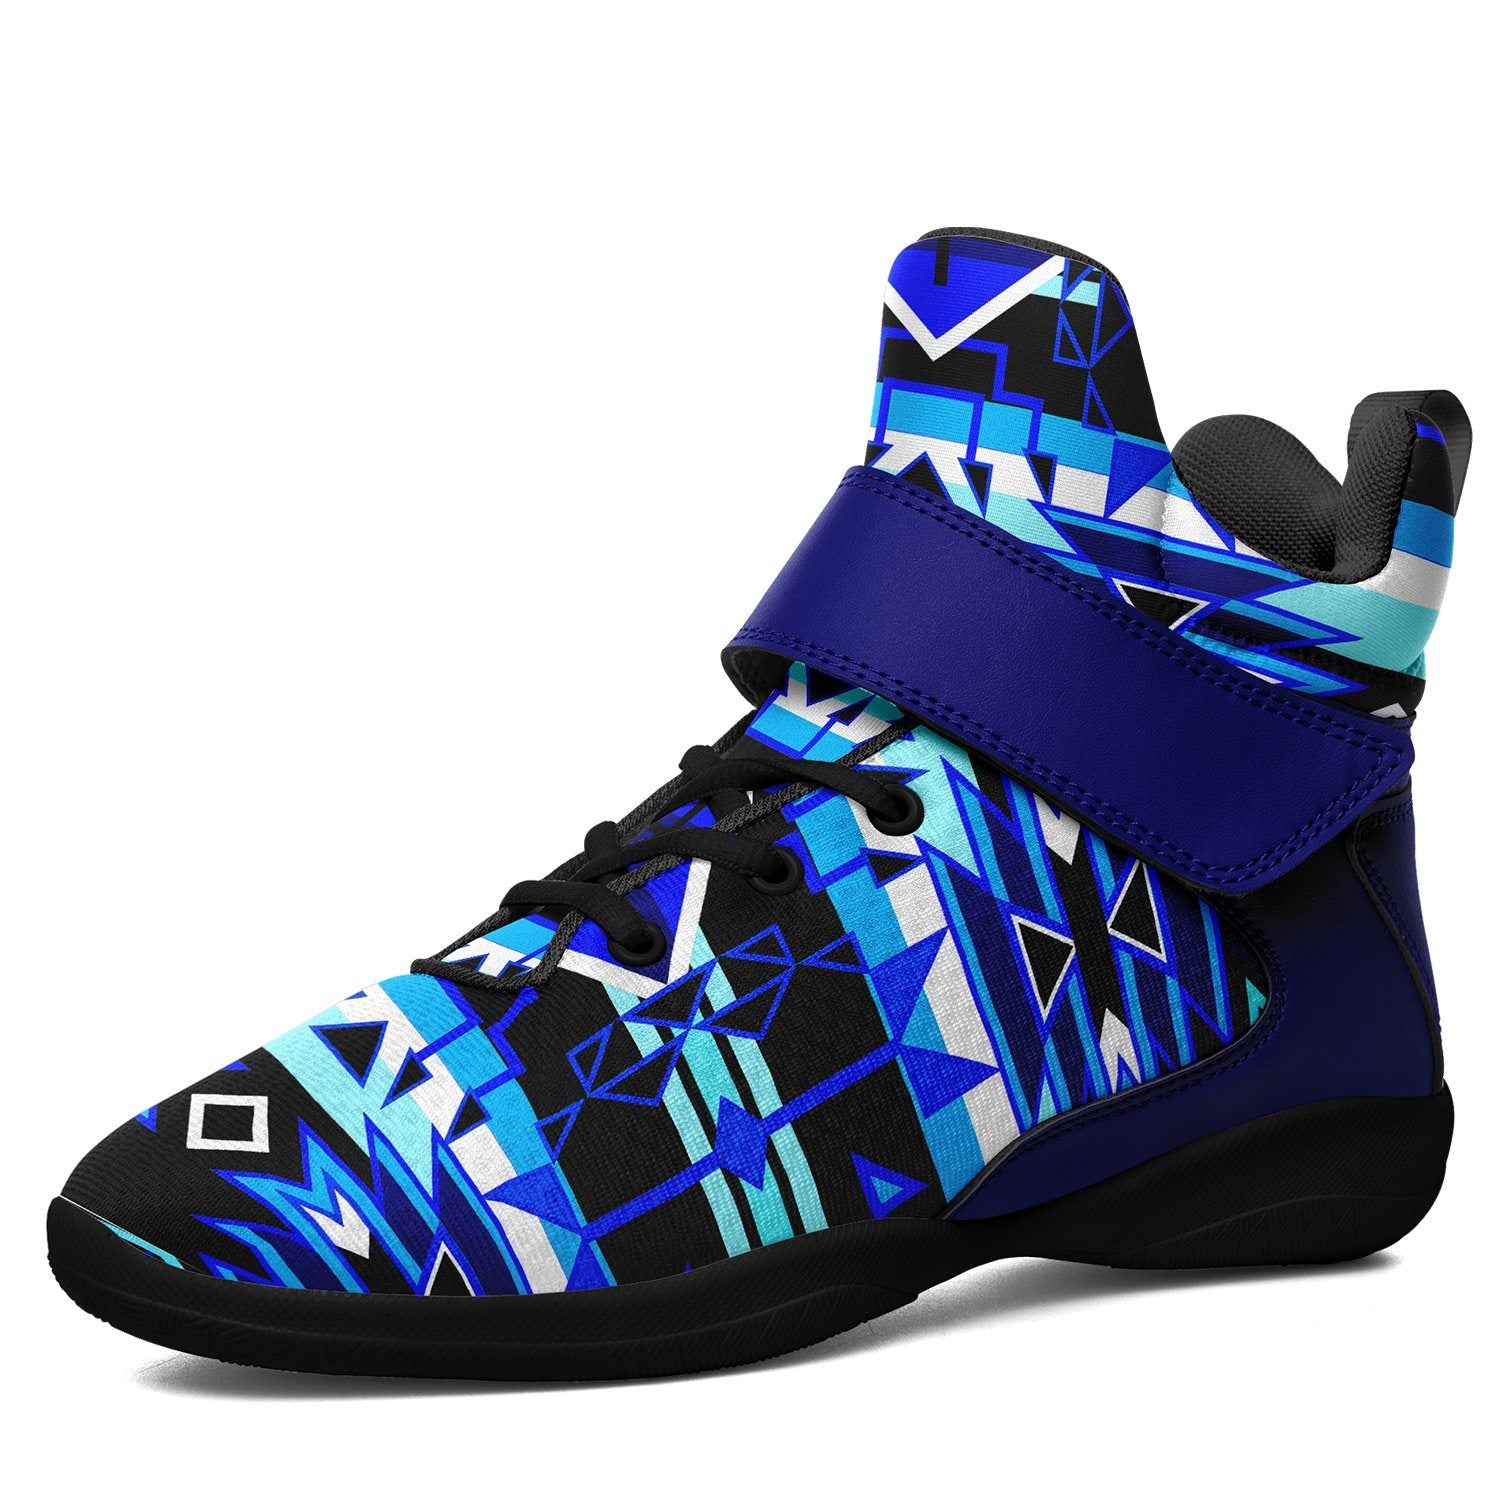 Force of Nature Winter Night Ipottaa Basketball / Sport High Top Shoes 49 Dzine US Women 4.5 / US Youth 3.5 / EUR 35 Black Sole with Blue Strap 